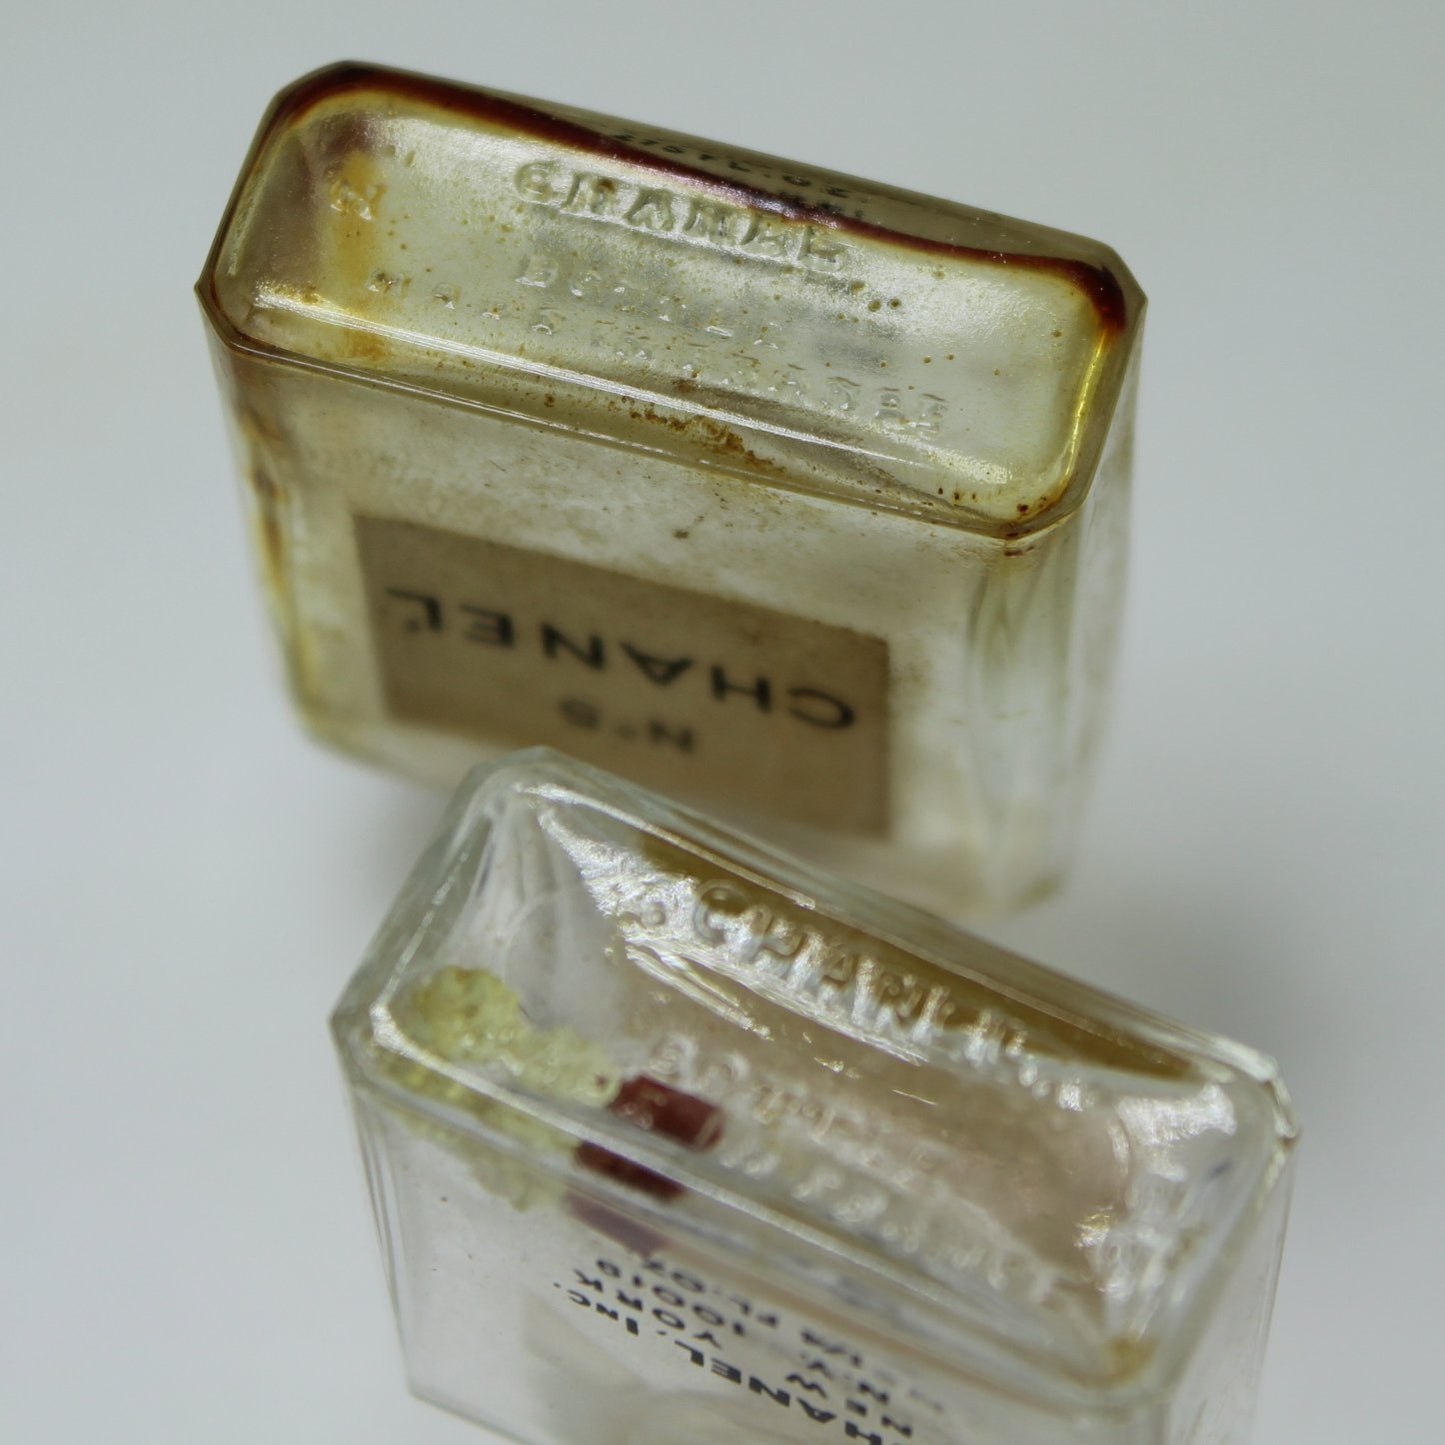 Chanel No. 5 Perfume Bottles .275 and 1/4 oz Miniatures bottles made in france incised marked